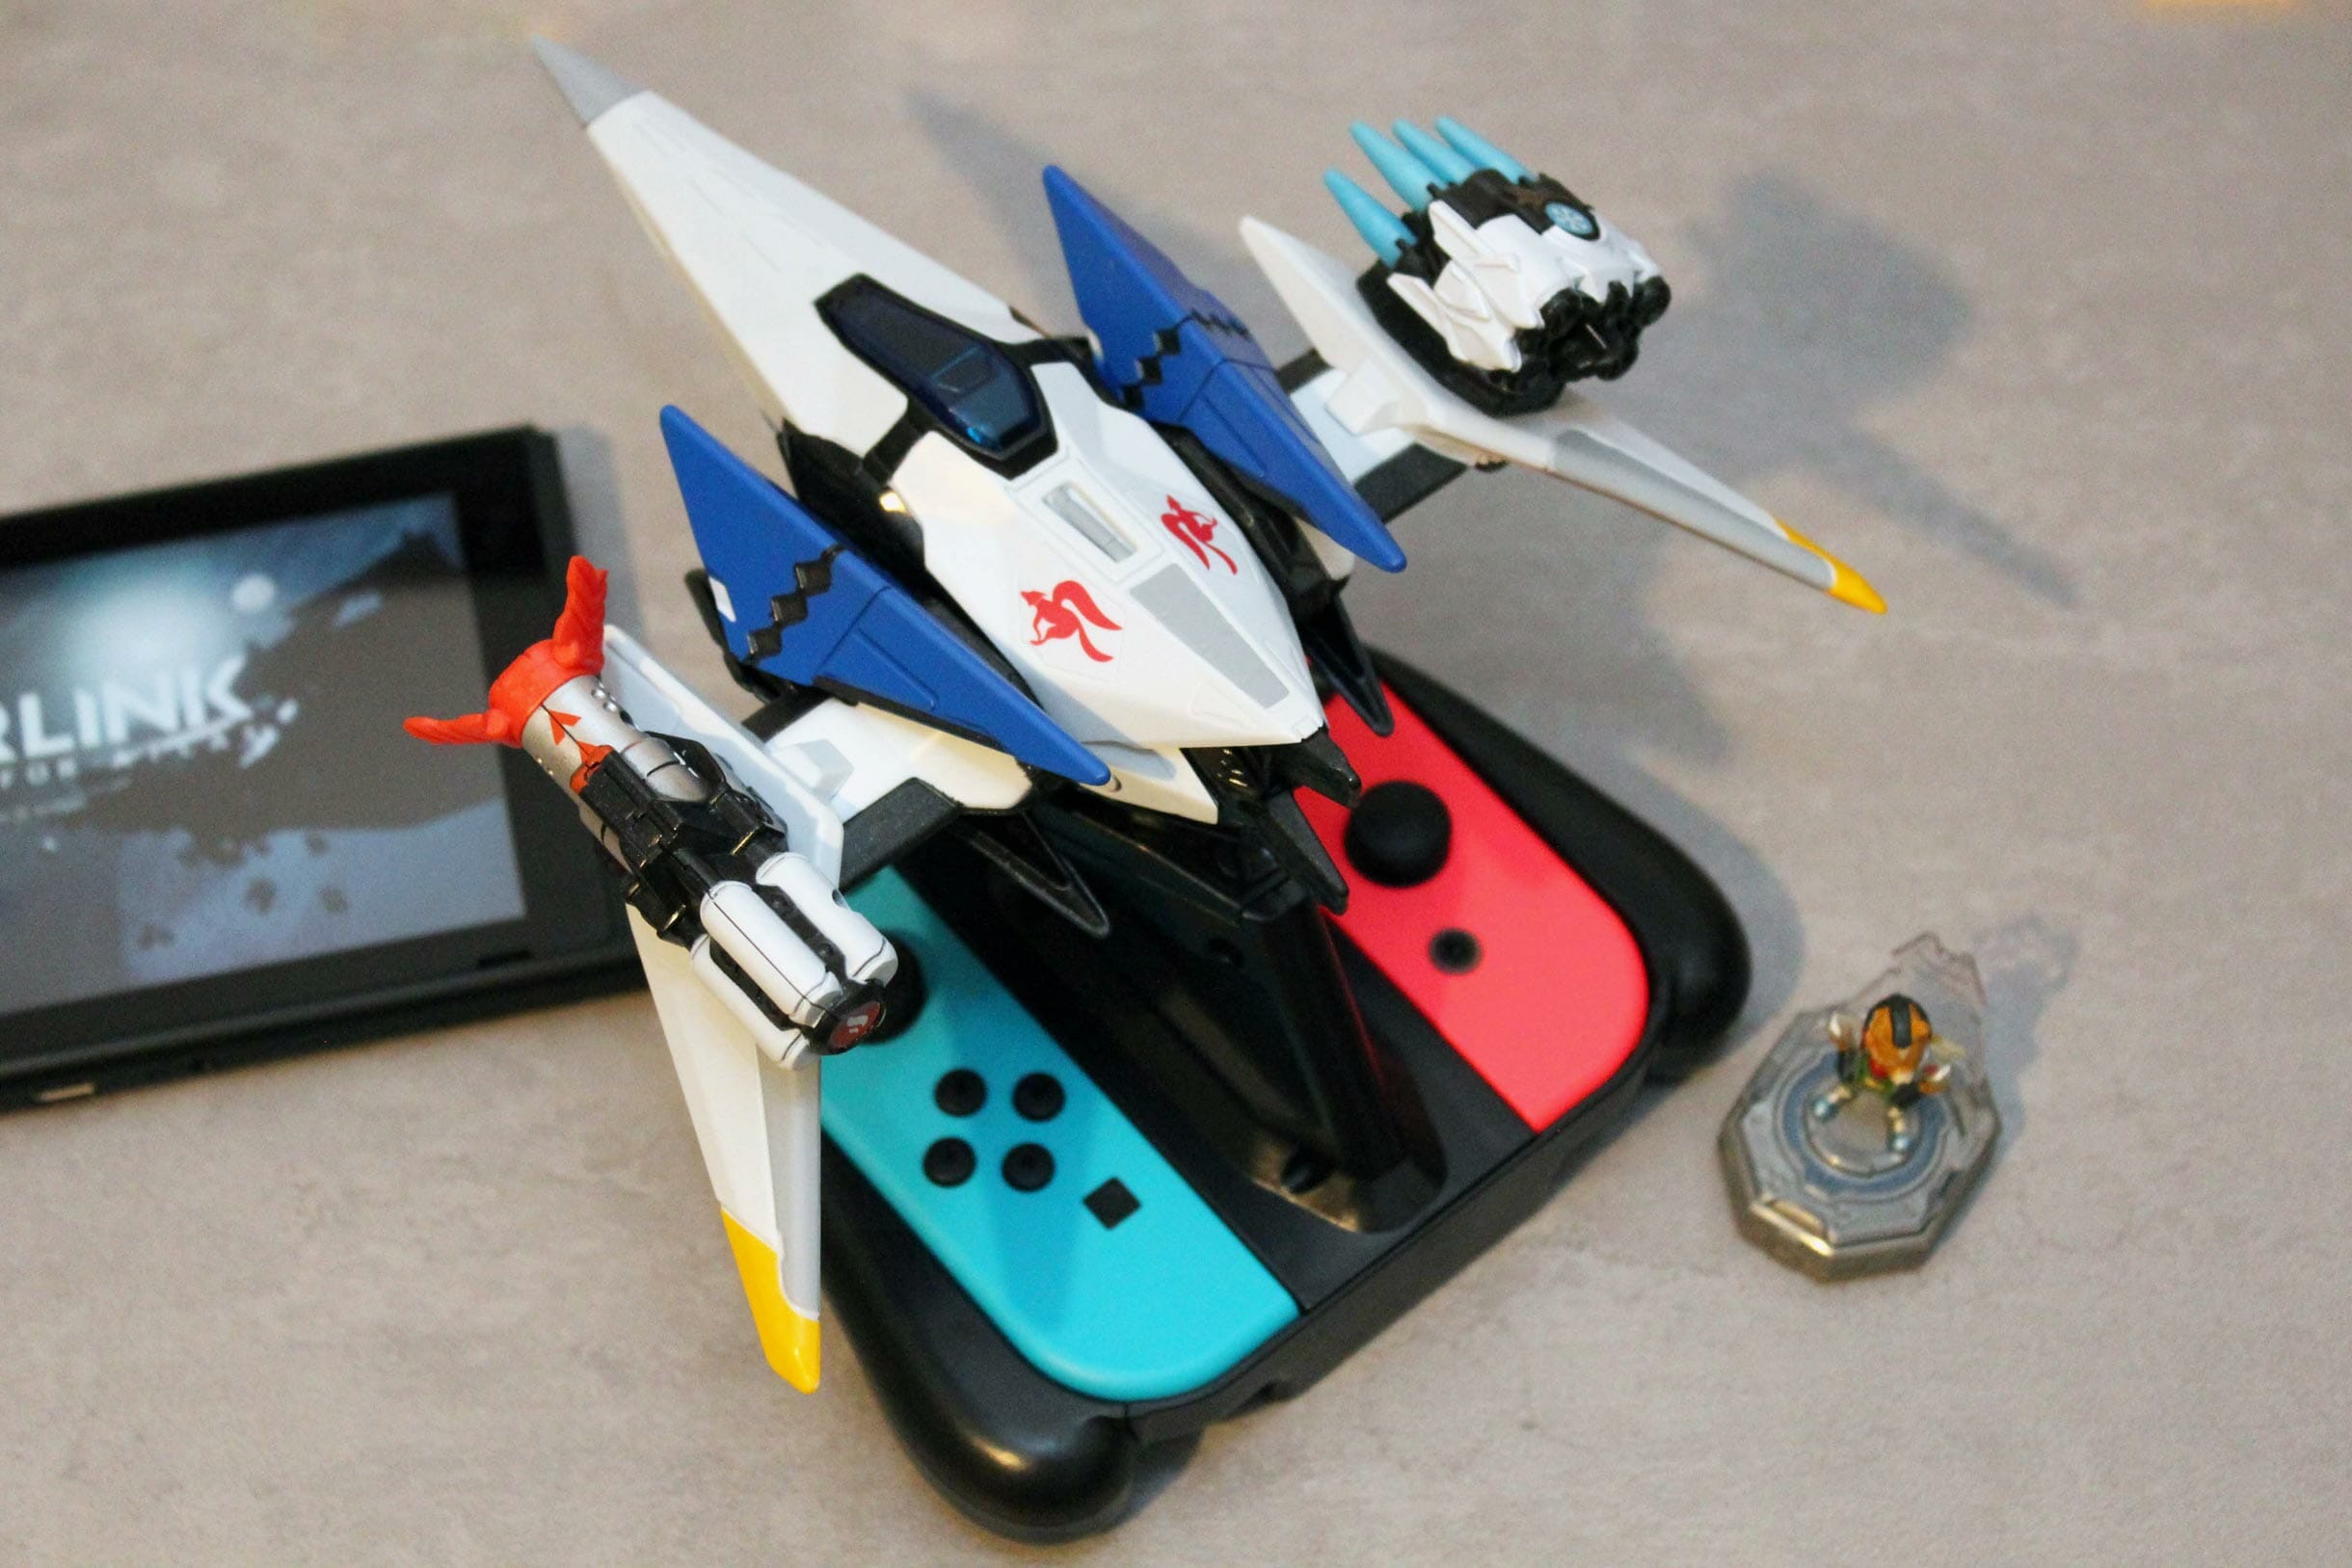 starlink for switch